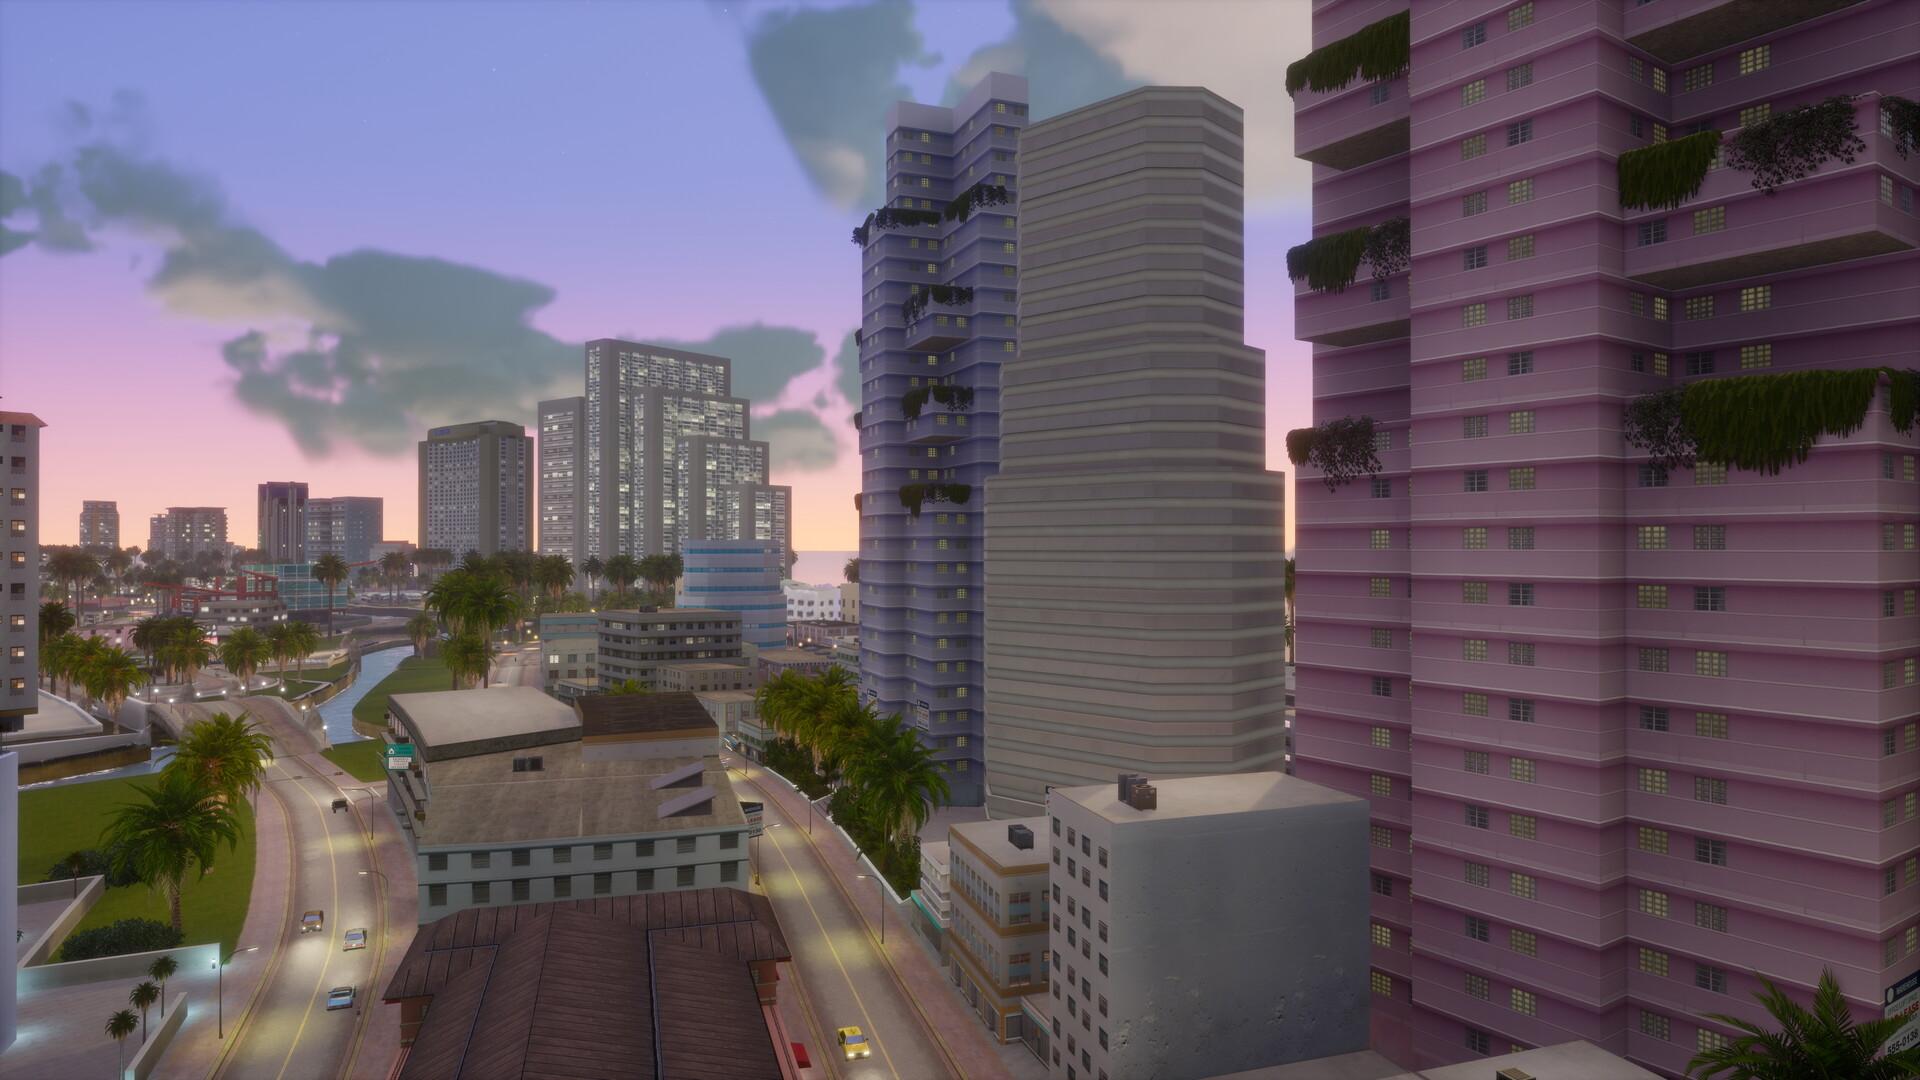 Screenshot №4 from game Grand Theft Auto: Vice City – The Definitive Edition